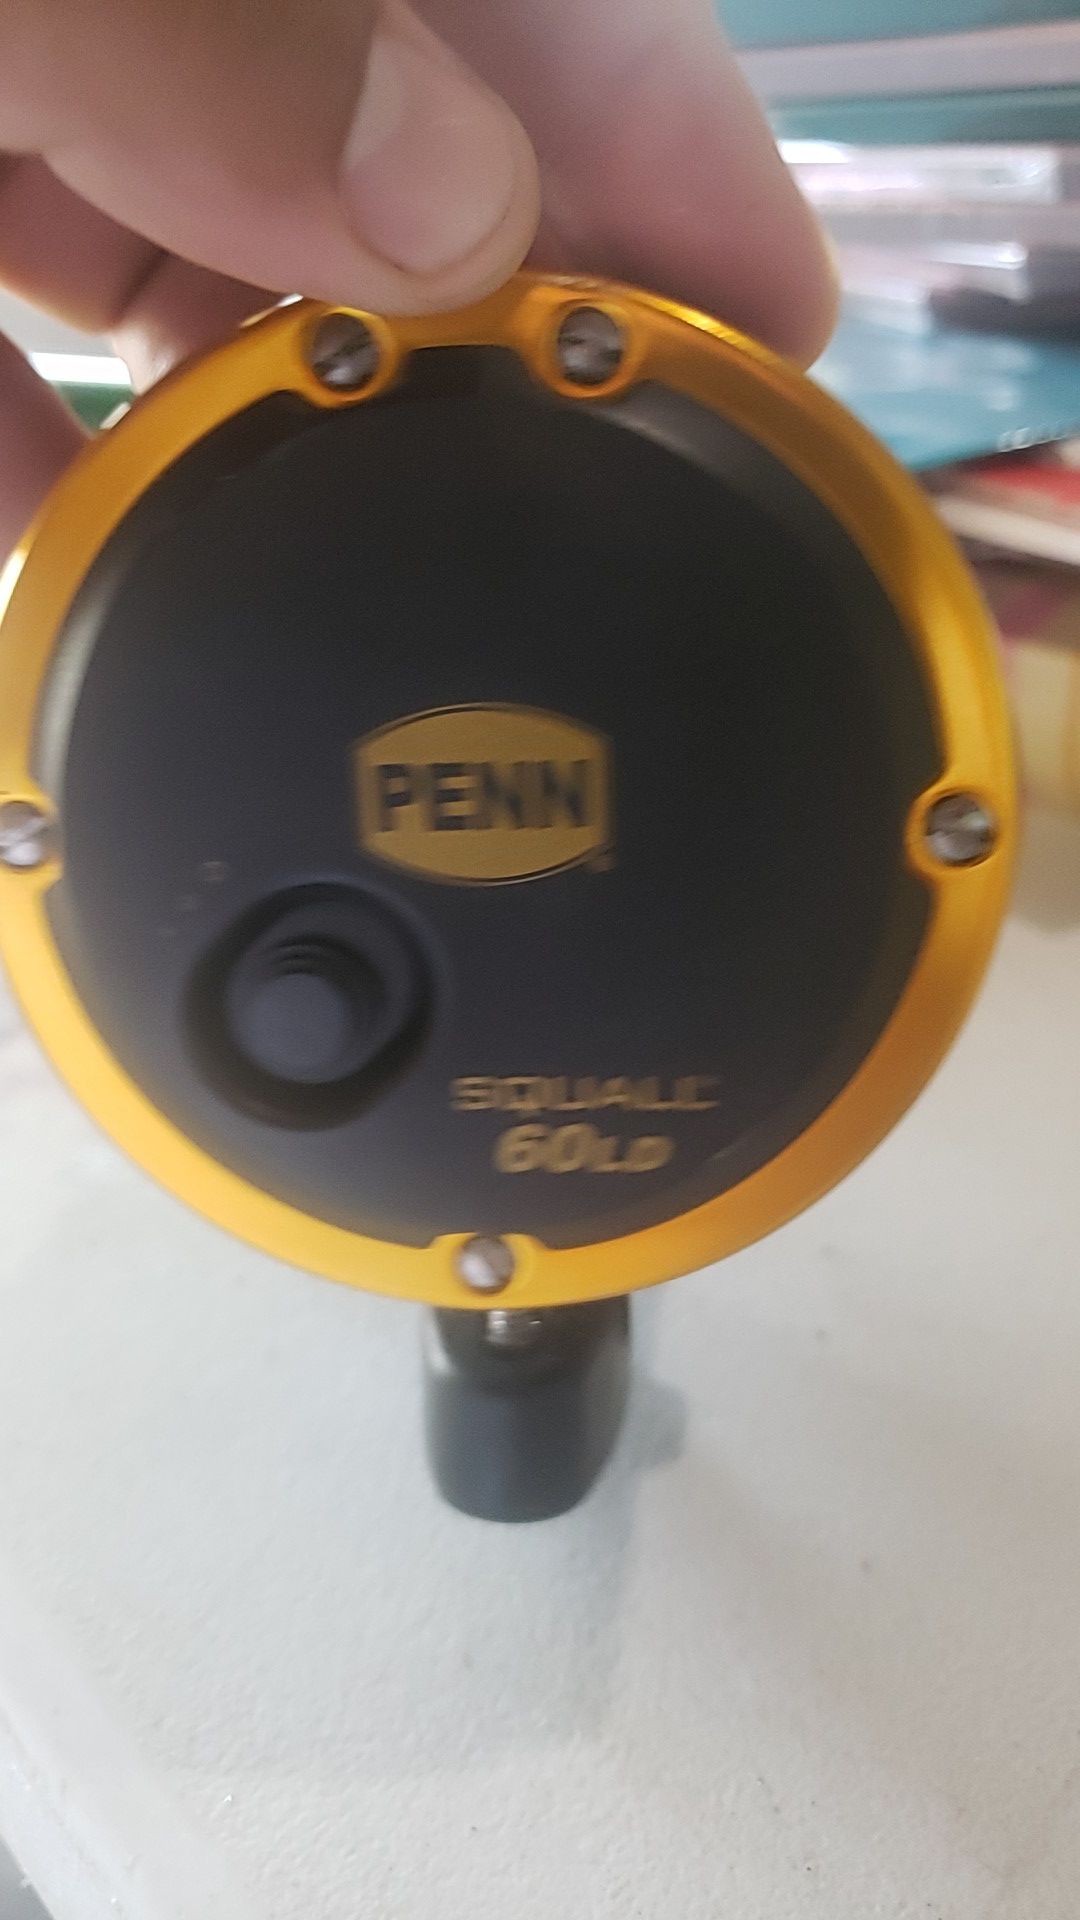 Penn squall rod and reel